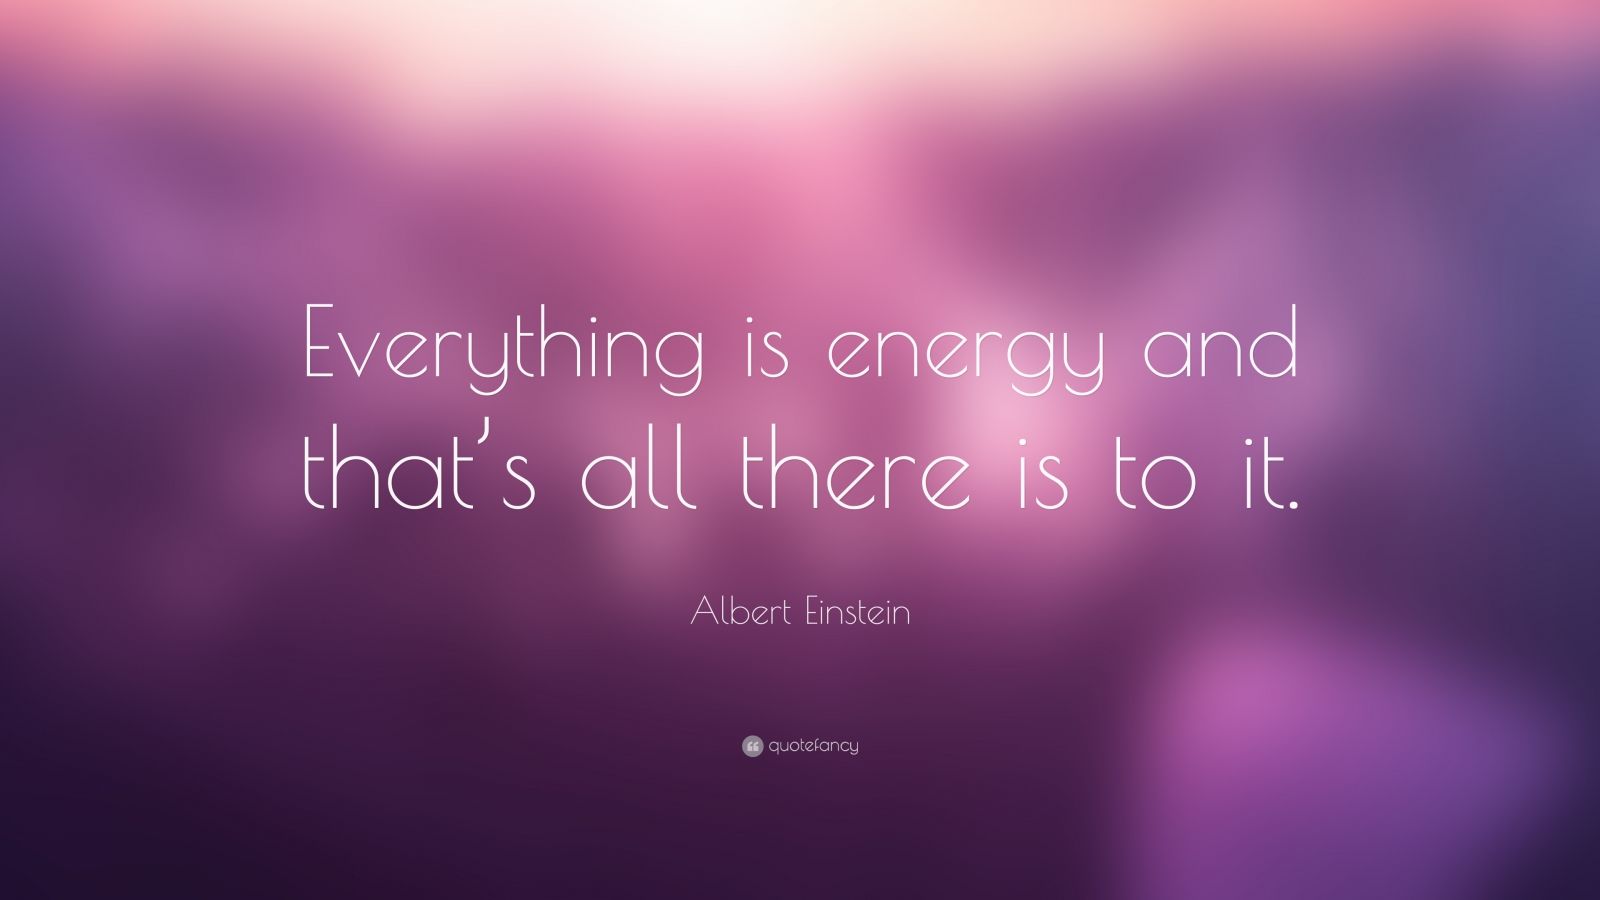 Albert Einstein Quote: “Everything is energy and that’s all there is to ...